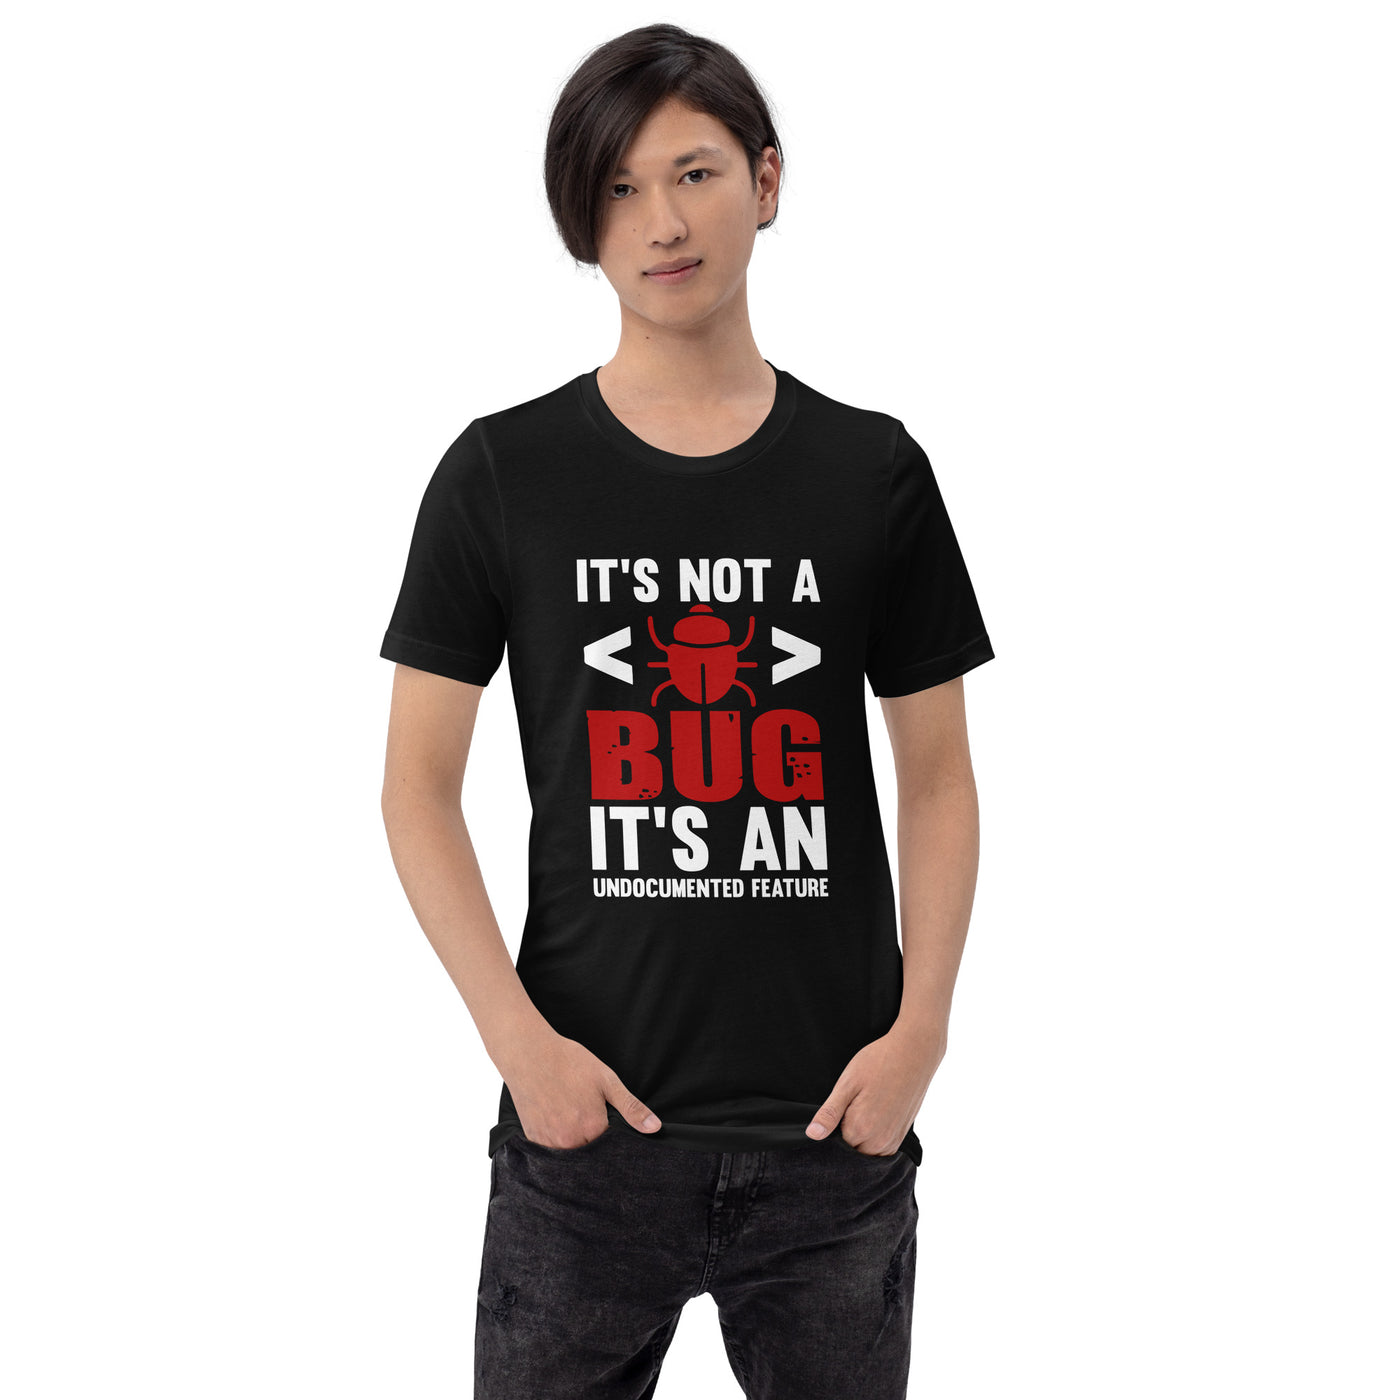 It's not a Bug; it's an Undocumented Feature - Unisex t-shirt